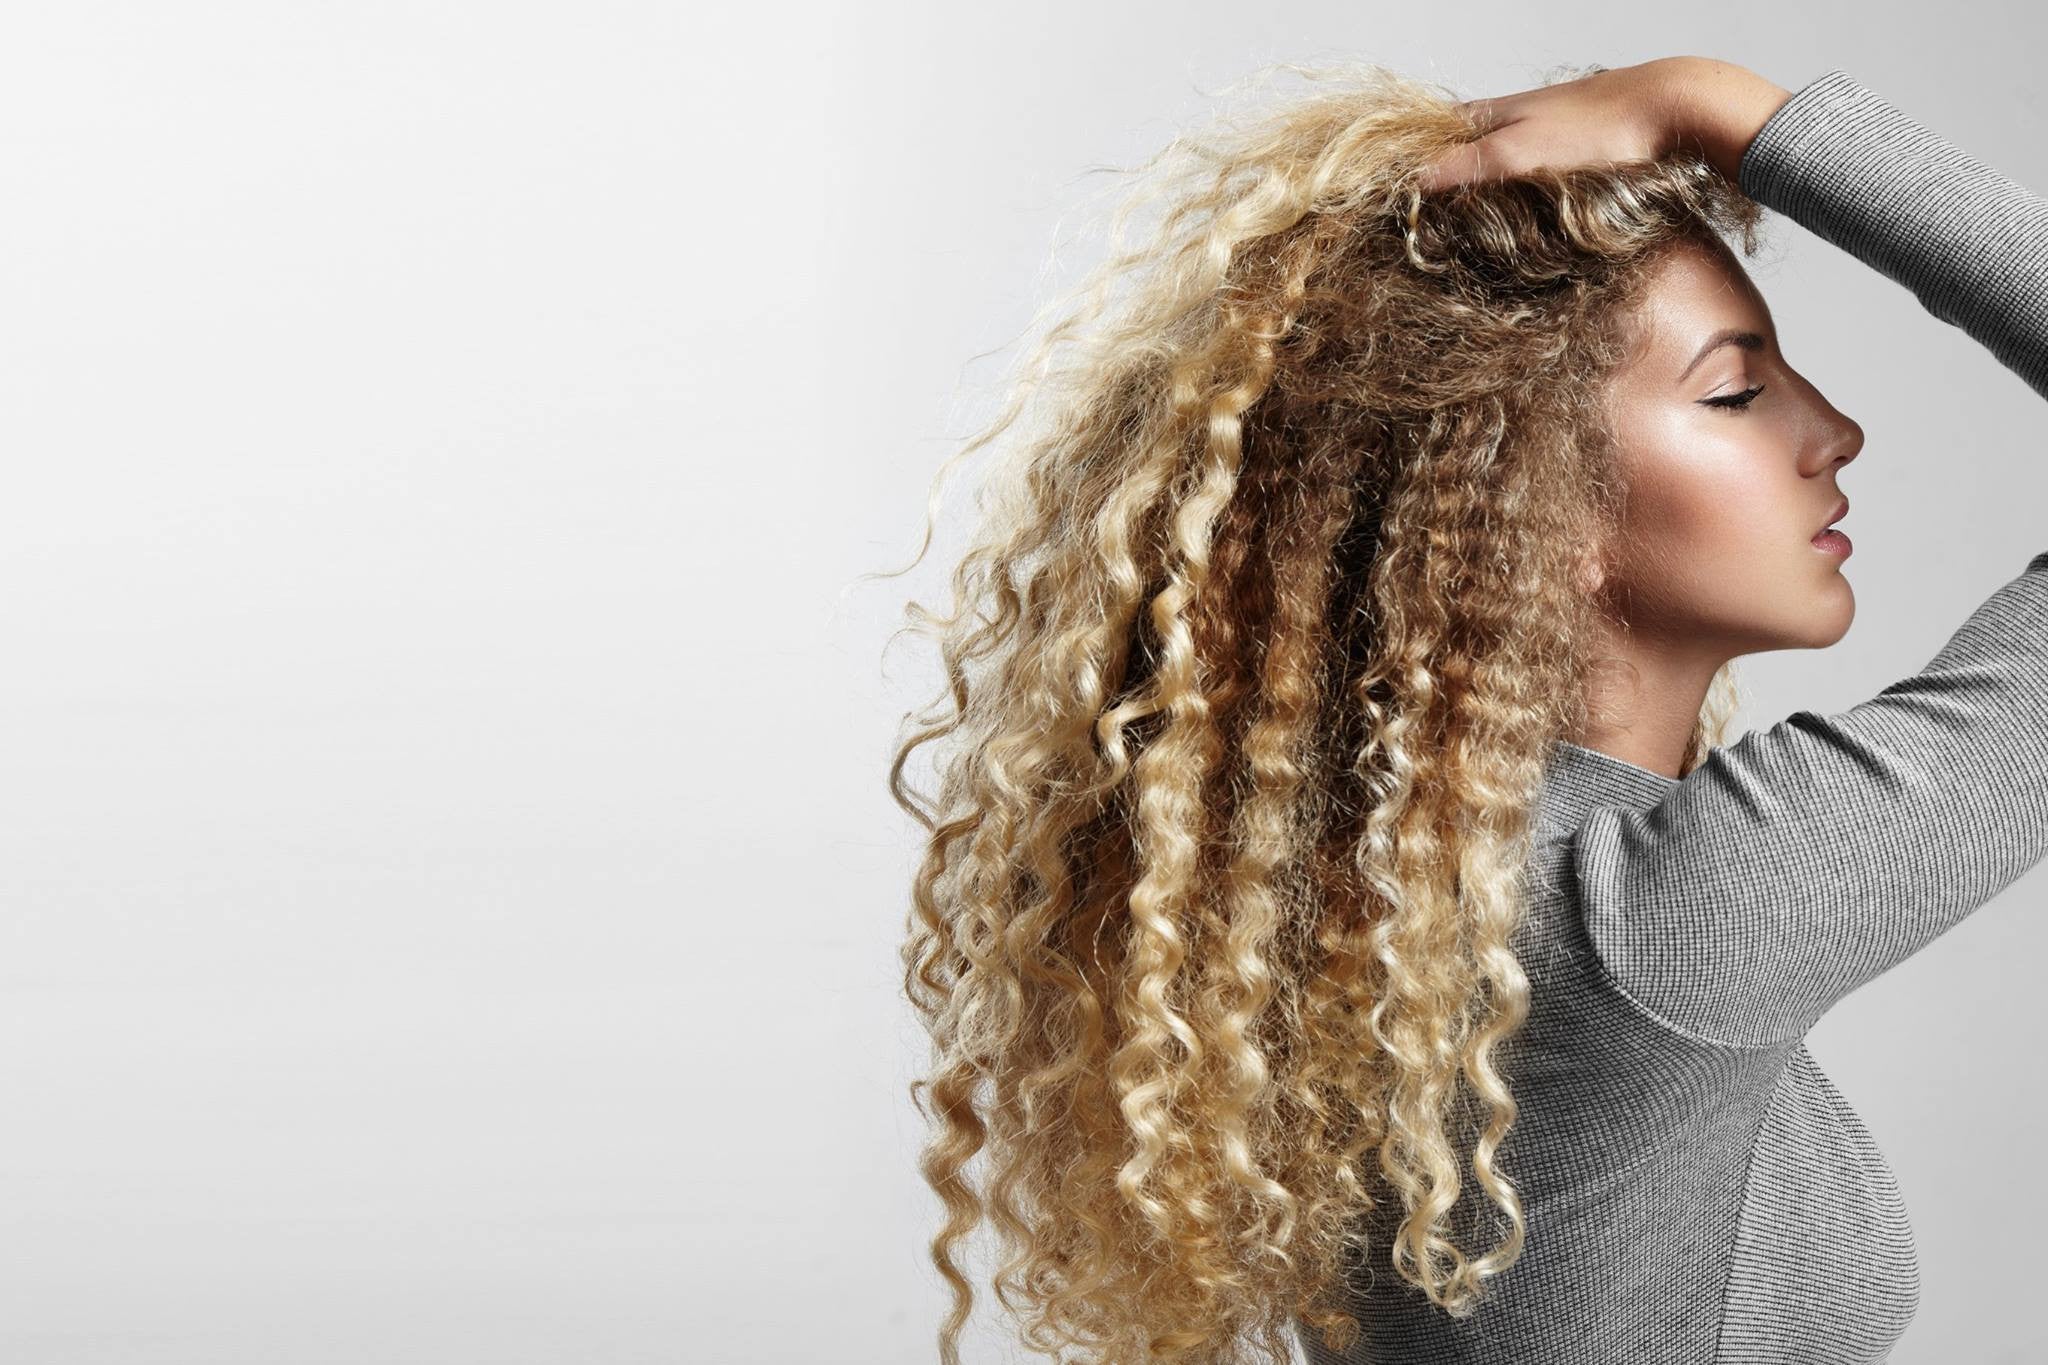 How to Treat your Dandruff or Dry Scalp Condition